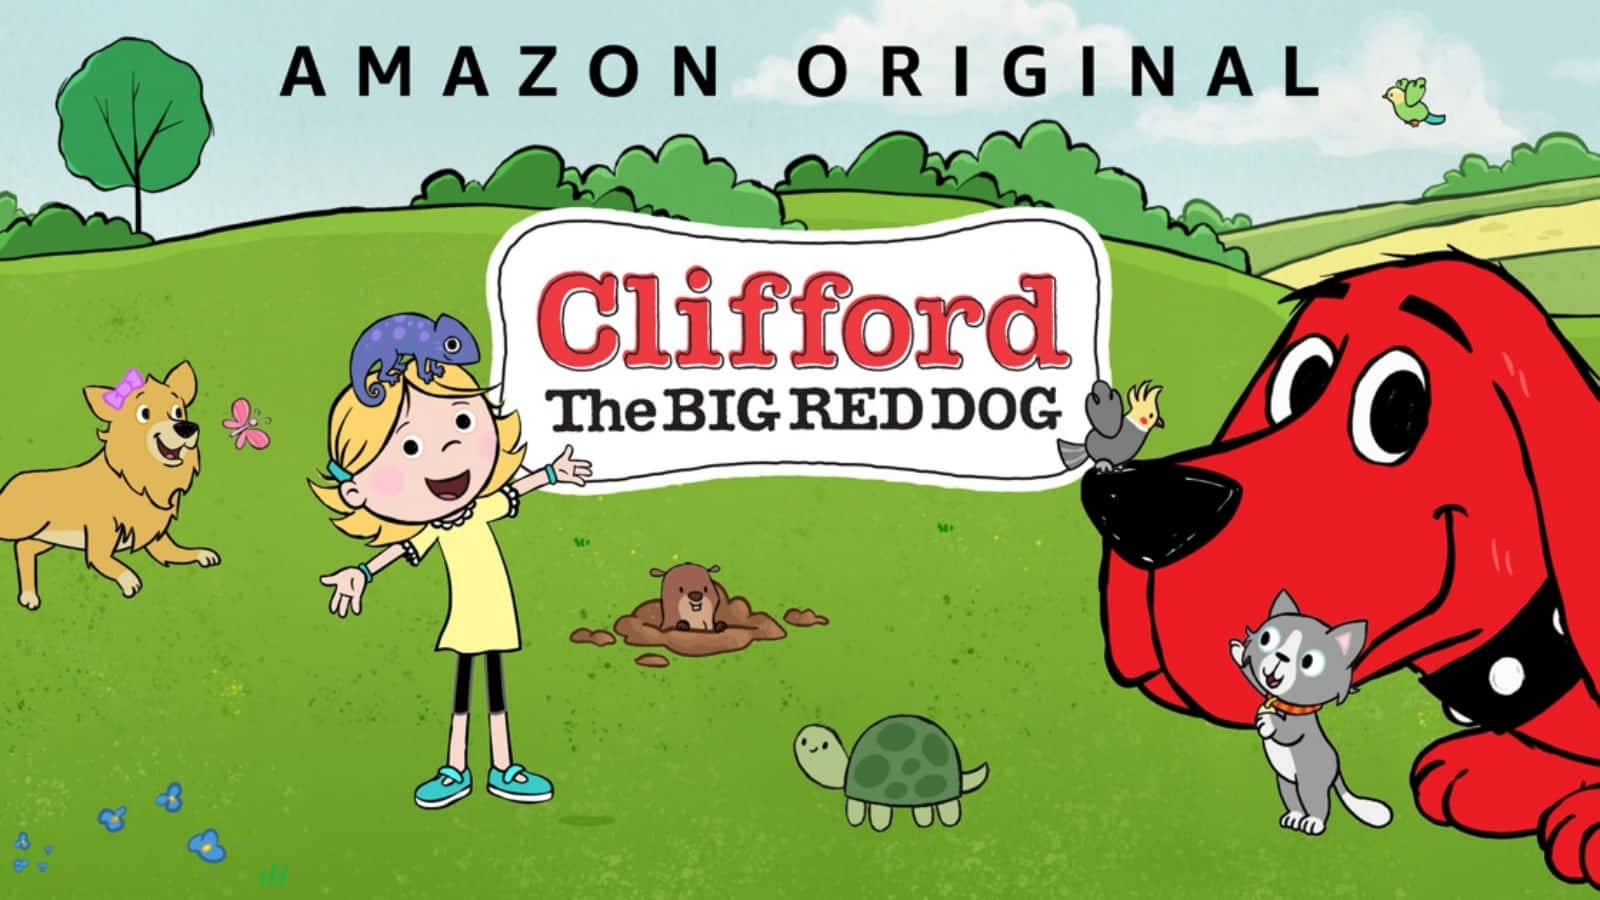 Clifford the Big Red Dog eagerly anticipating an adventure